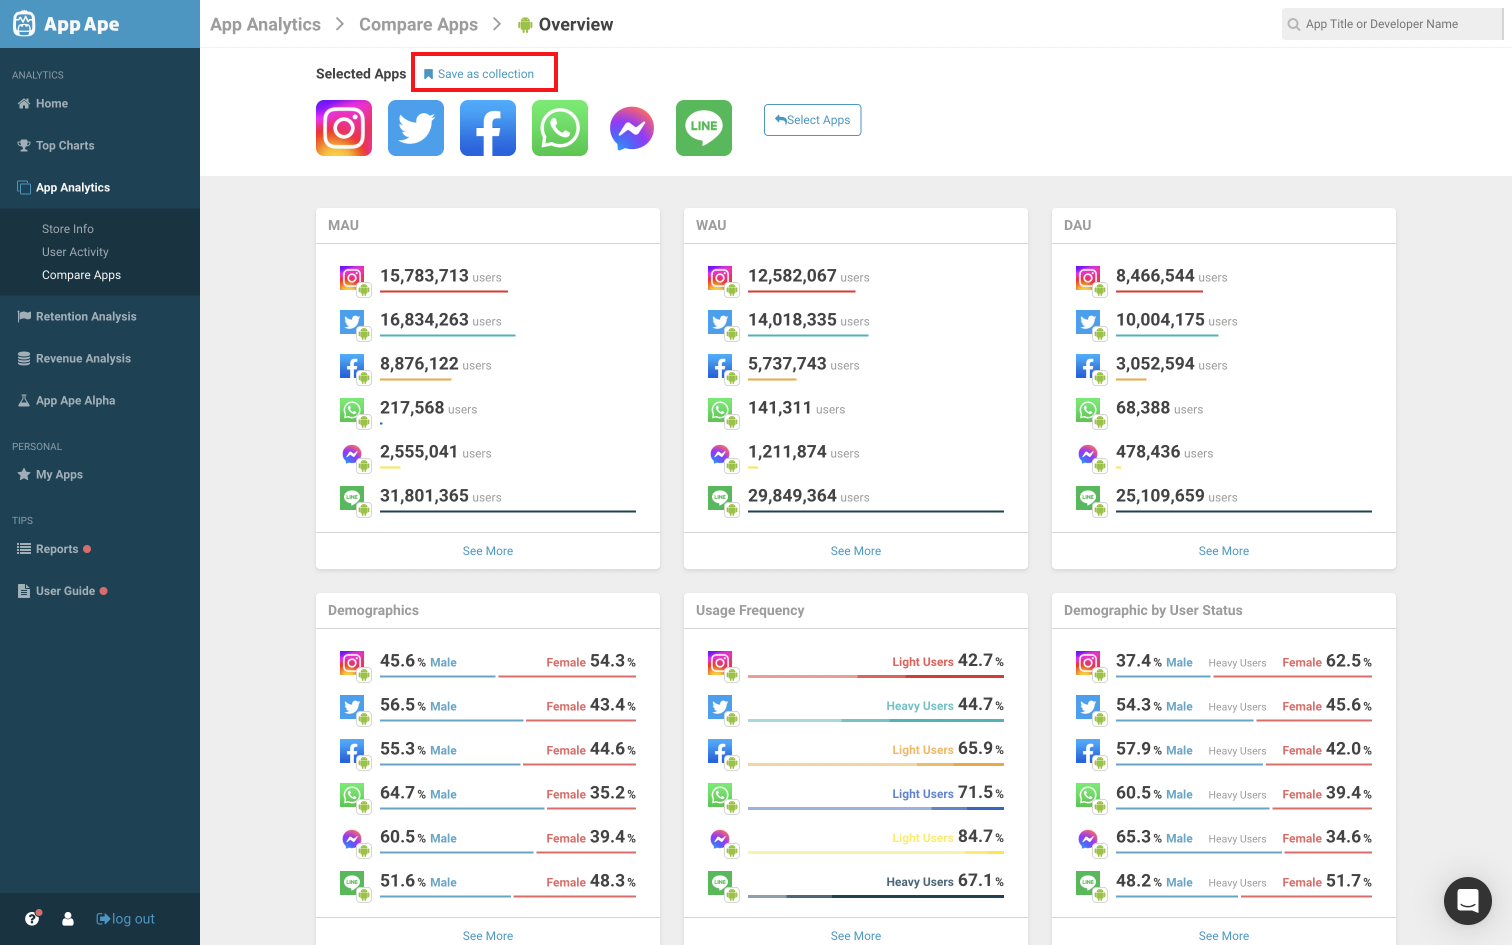 Compare Apps Overview page > Save Compare Collection